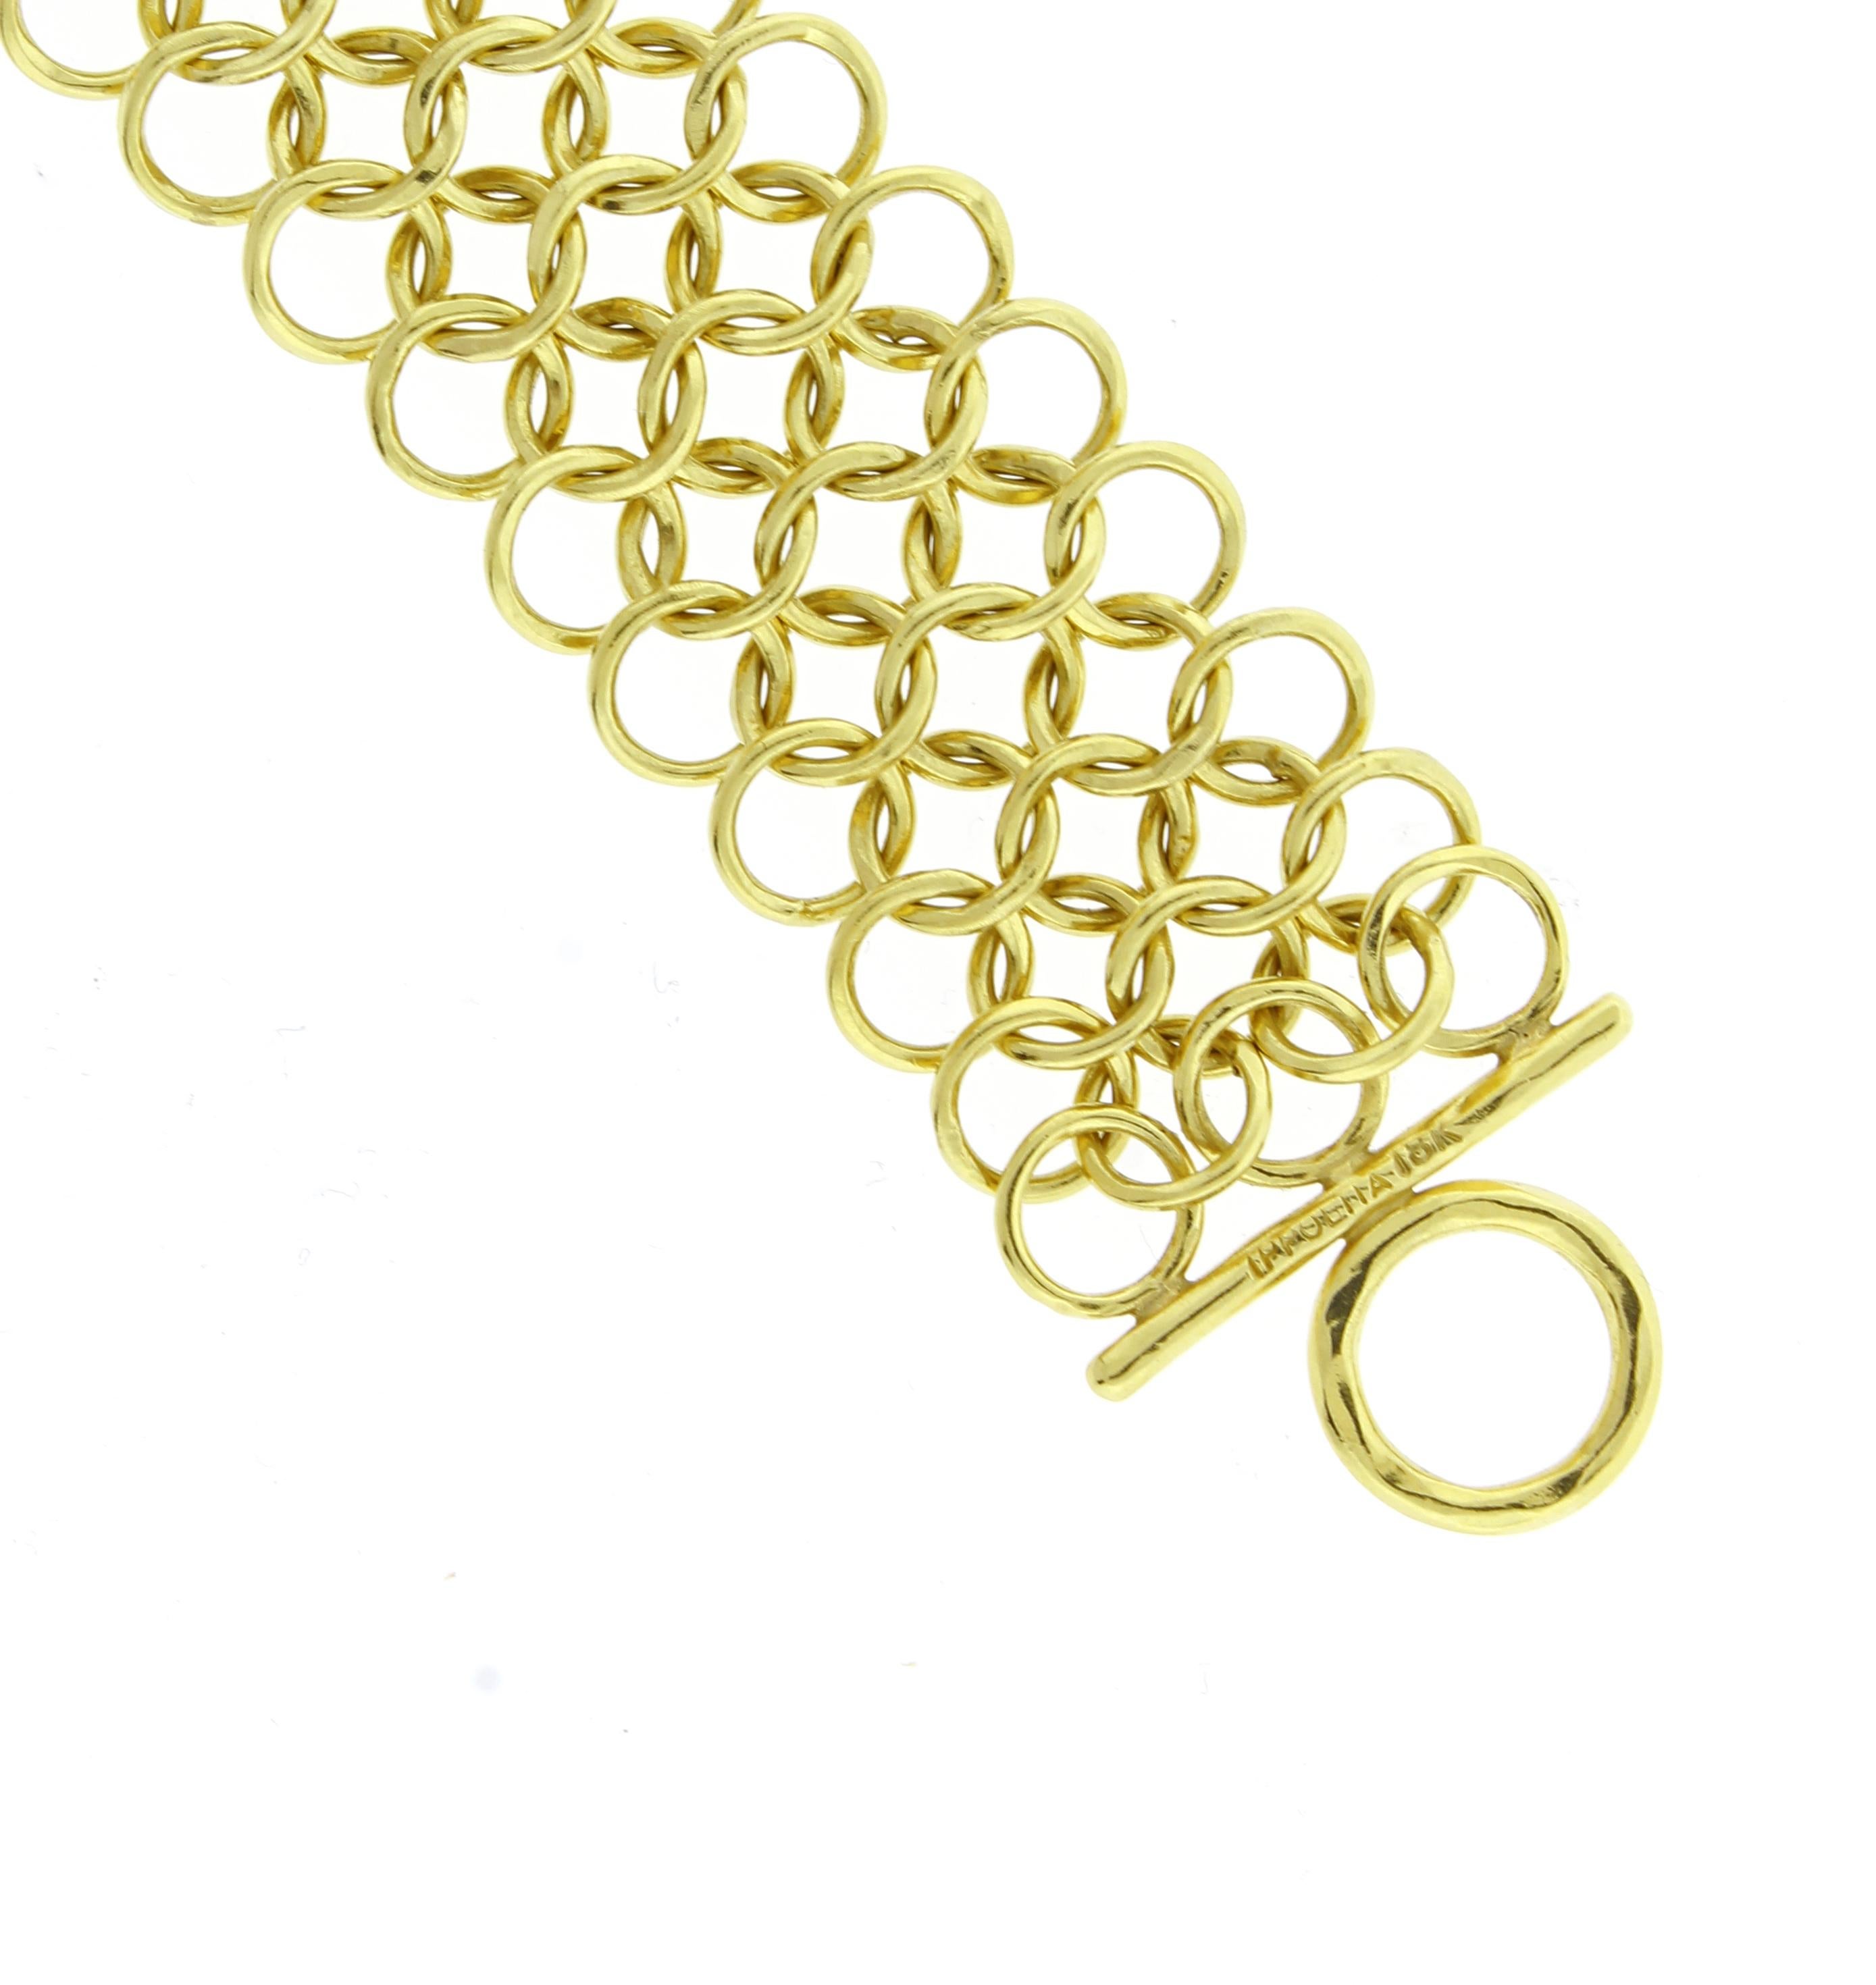 From Ippolita thier  triple  interlocking circle link bracelet
♦ Designer:  Ippolita 
♦ Metal: 18 karat
♦ 7 ¼ inchs long  7/8 inch wide
♦ 37.2 grams
♦ Circa 2010
♦ Packaging: Pampillonia presentation box 
♦ Condition: Excellent , pre-owned
♦ Price: